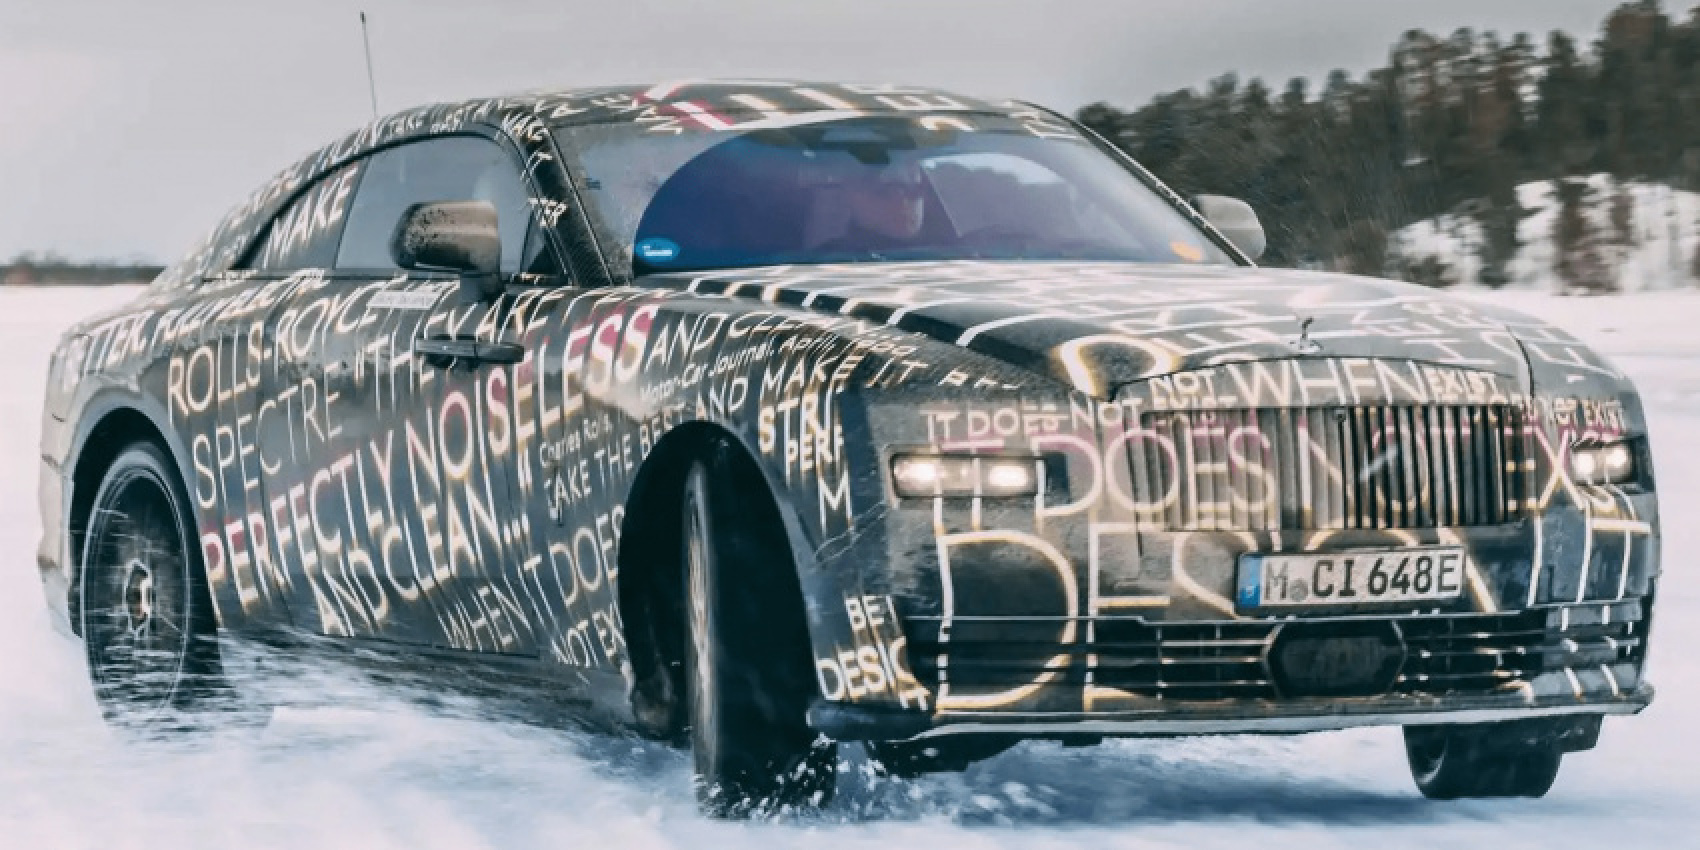 automobile, autos, cars, electric vehicle, rolls-royce, arjeplog, spectre, sweden, rolls-royce completes winter testing for the spectre